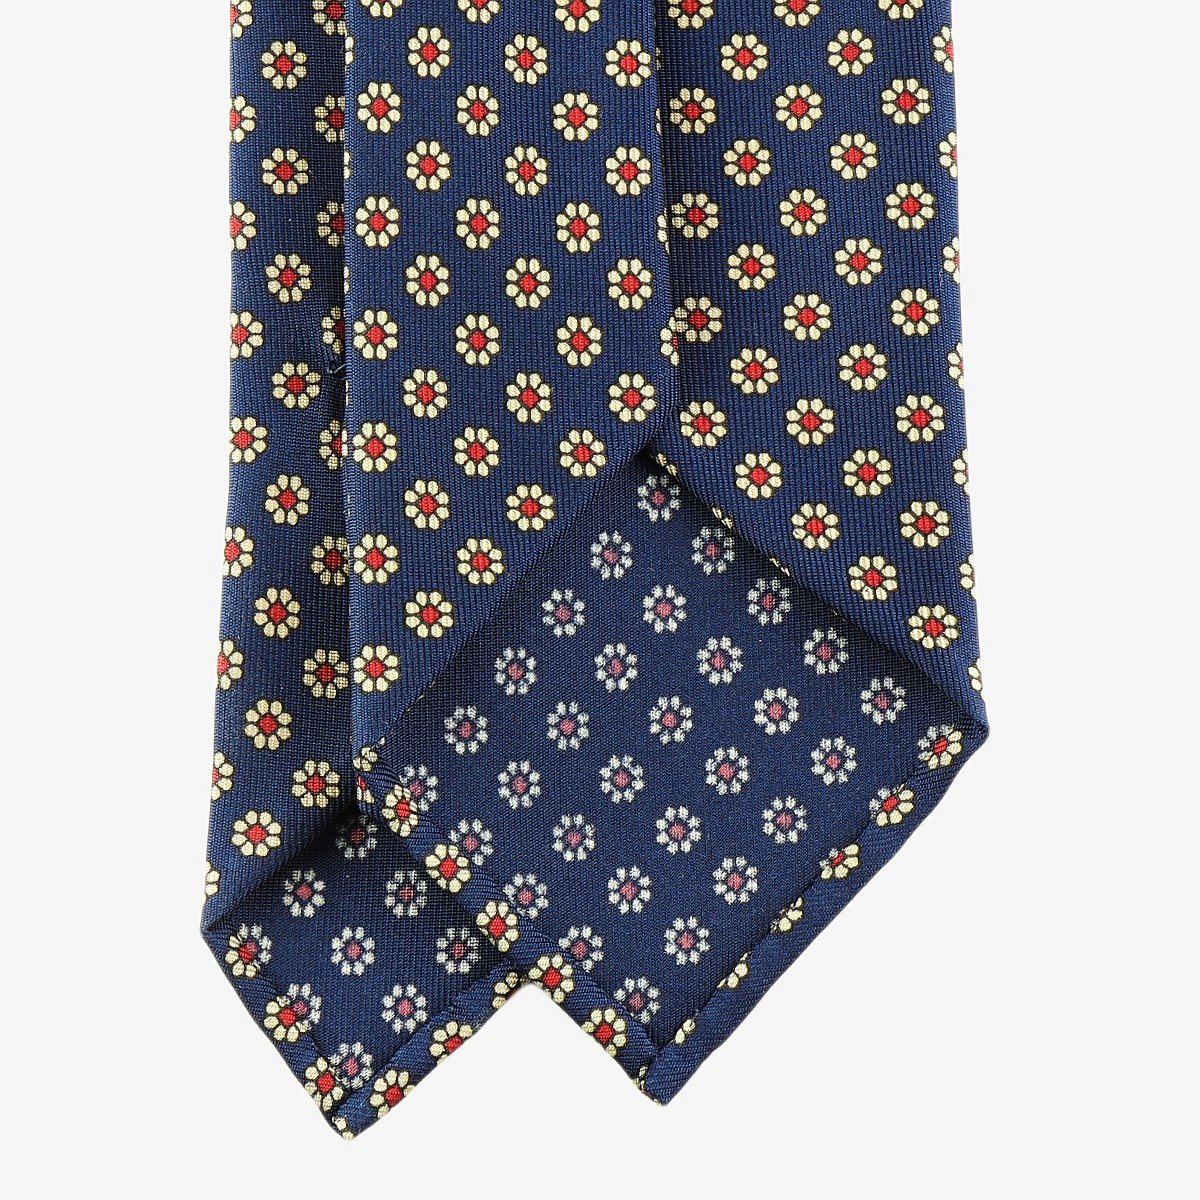 Shibumi Firenze navy silk tie with yellow and red floral pattern